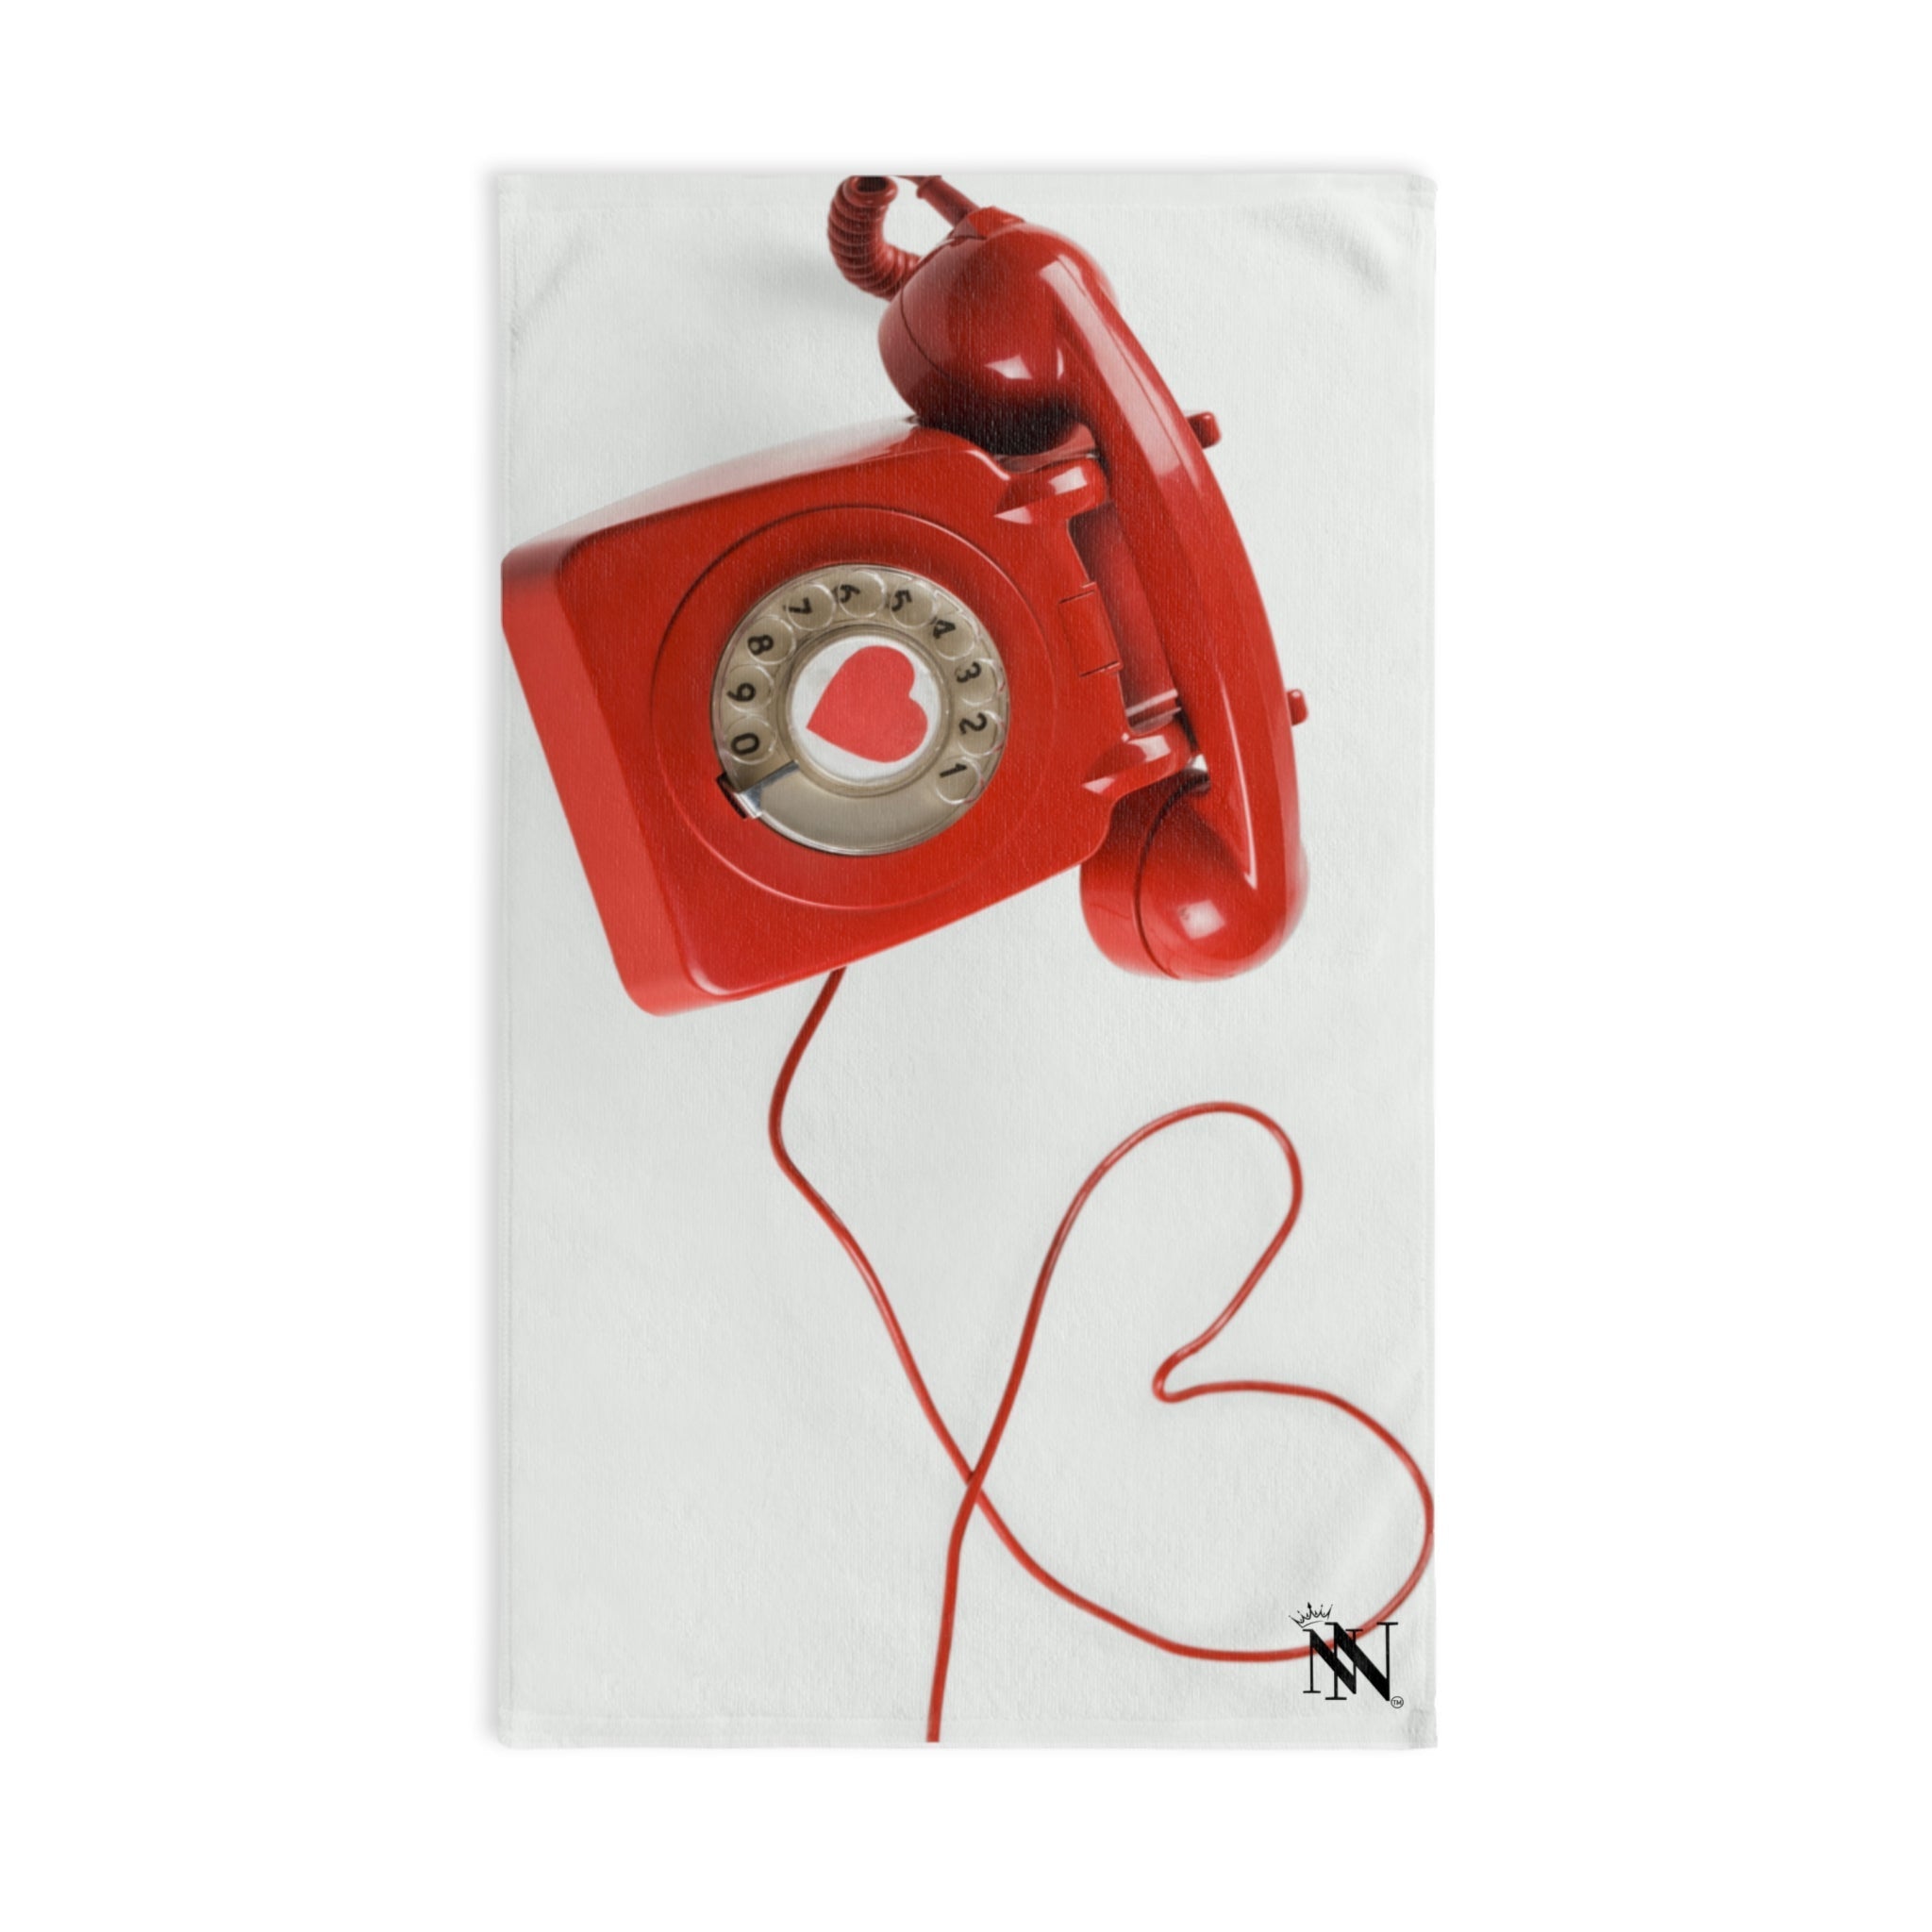 Rotary Call Phone 3D White | Funny Gifts for Men - Gifts for Him - Birthday Gifts for Men, Him, Her, Husband, Boyfriend, Girlfriend, New Couple Gifts, Fathers & Valentines Day Gifts, Christmas Gifts NECTAR NAPKINS